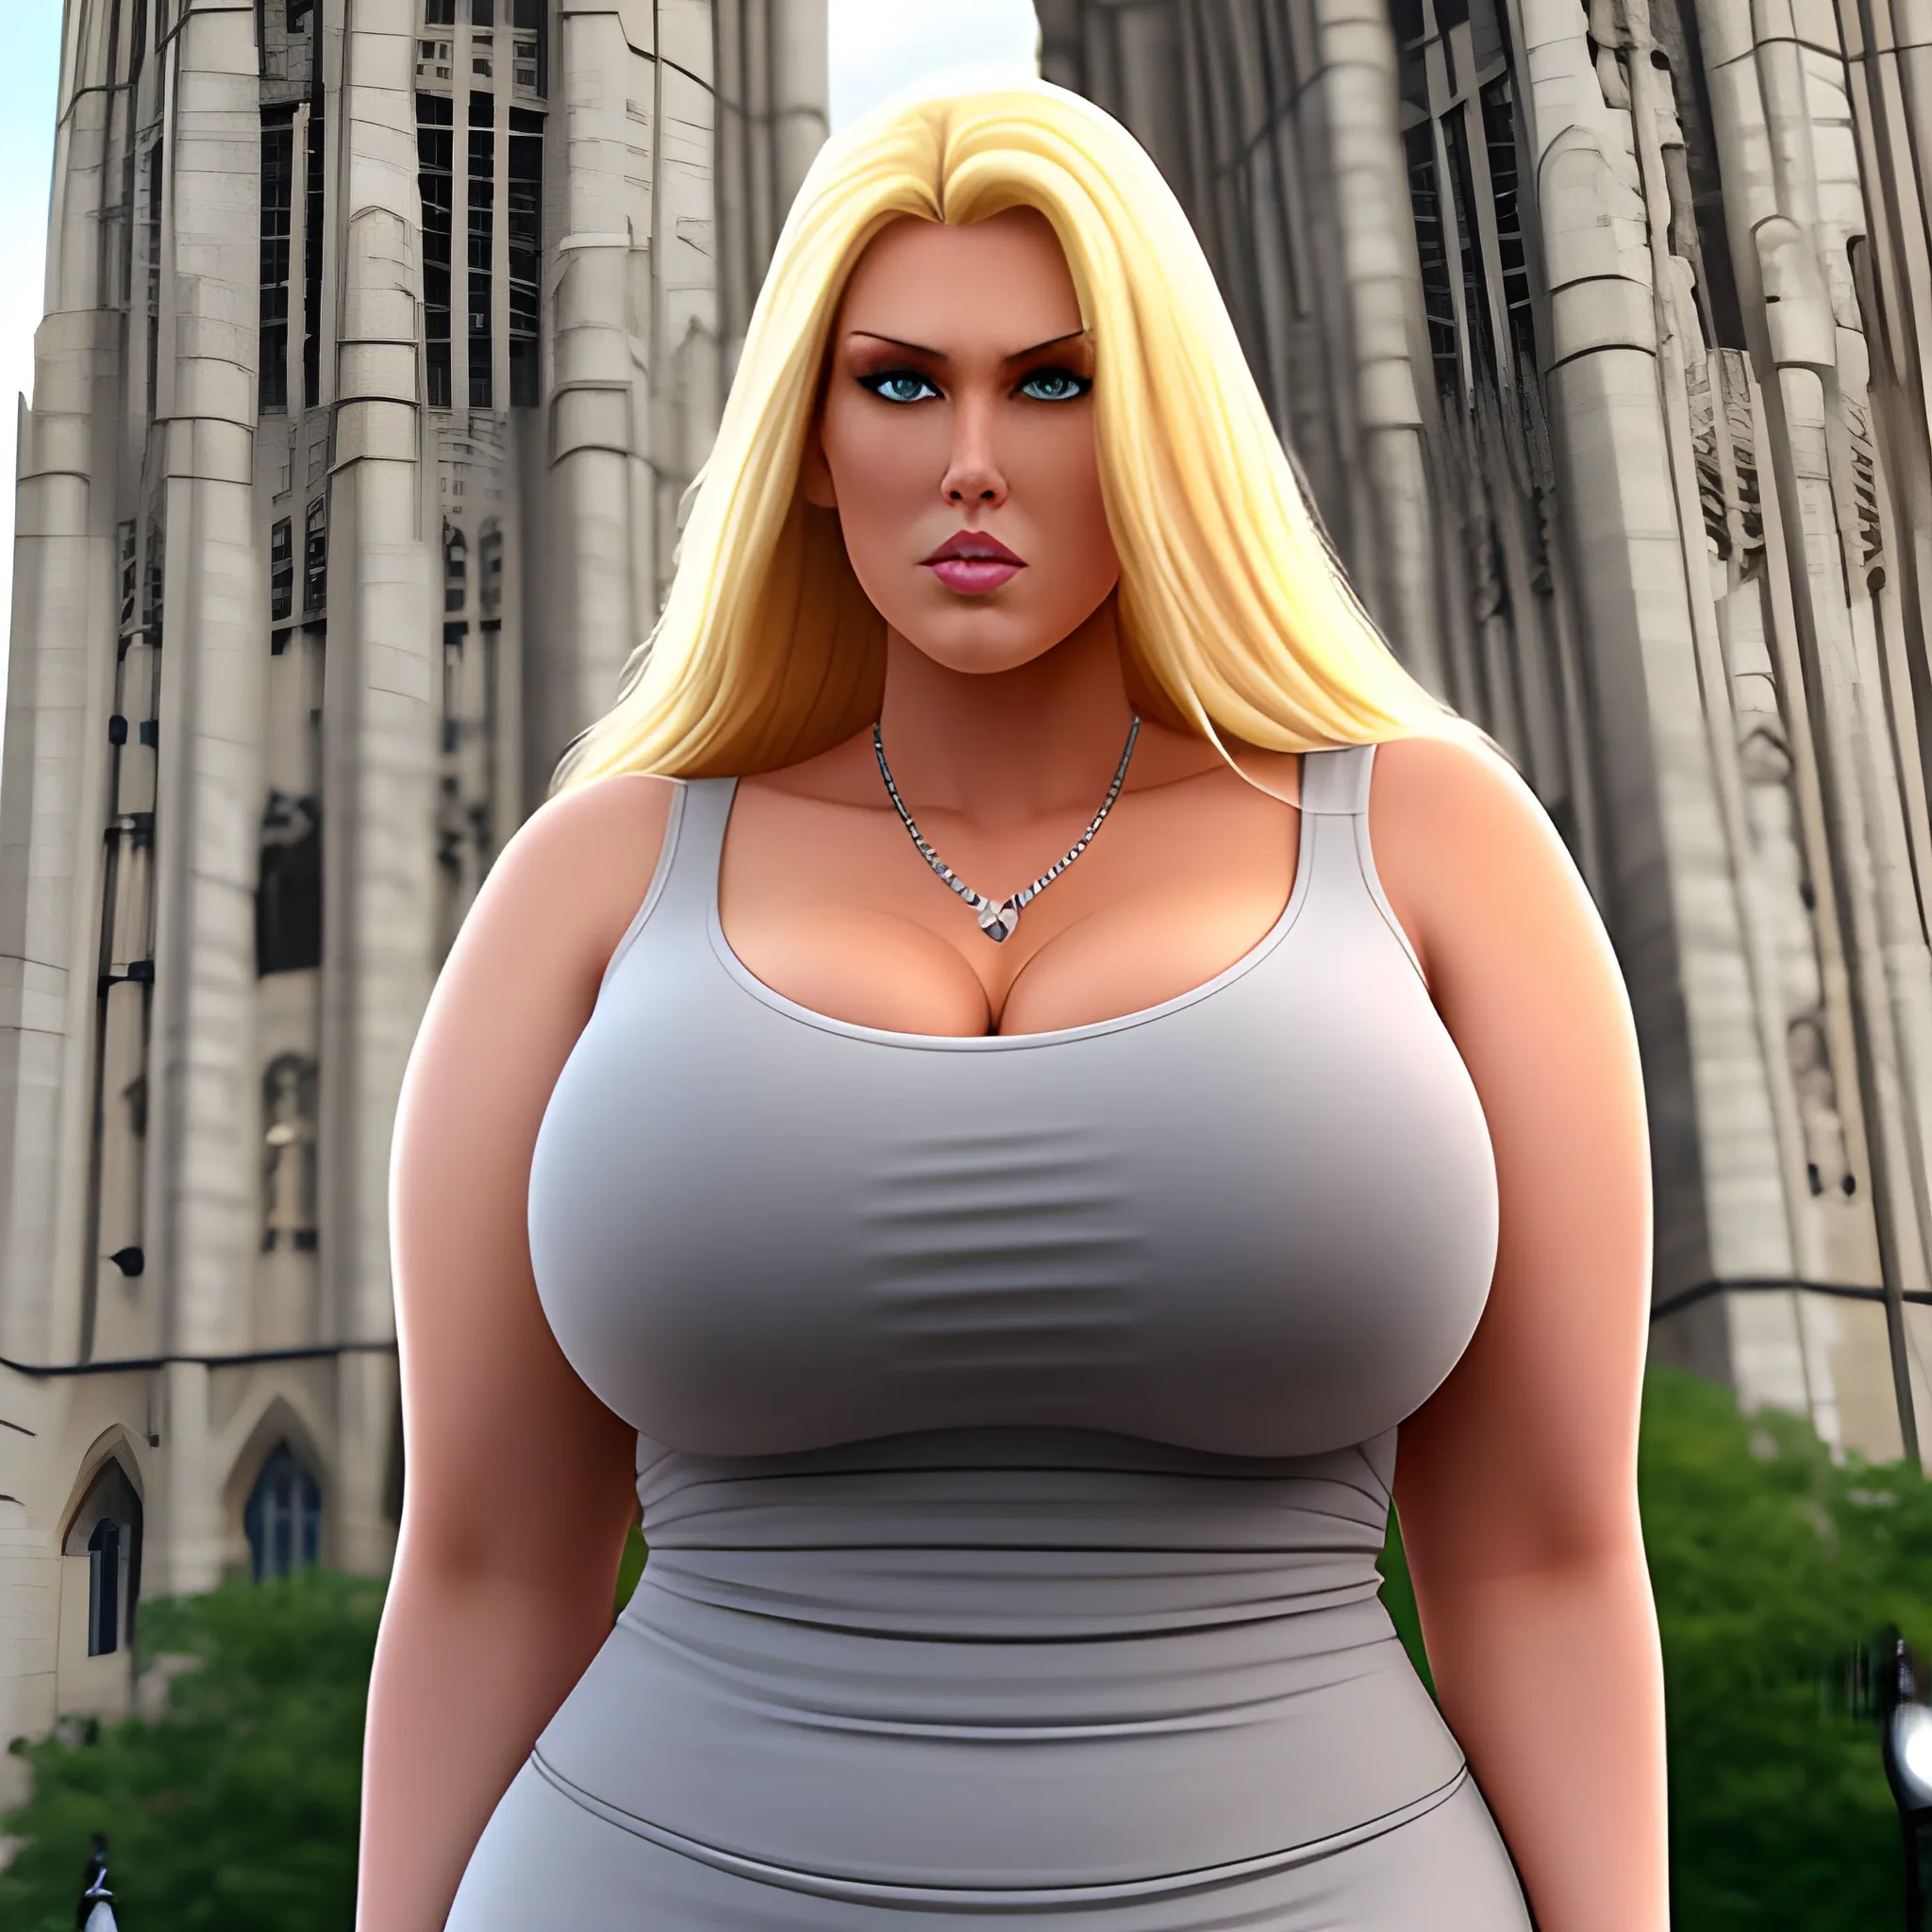 huge and very tall friendly blonde plus size girl with small head and broad shoulders, not curvy but massive, on busy schoolyard towerring among other students and teachers 